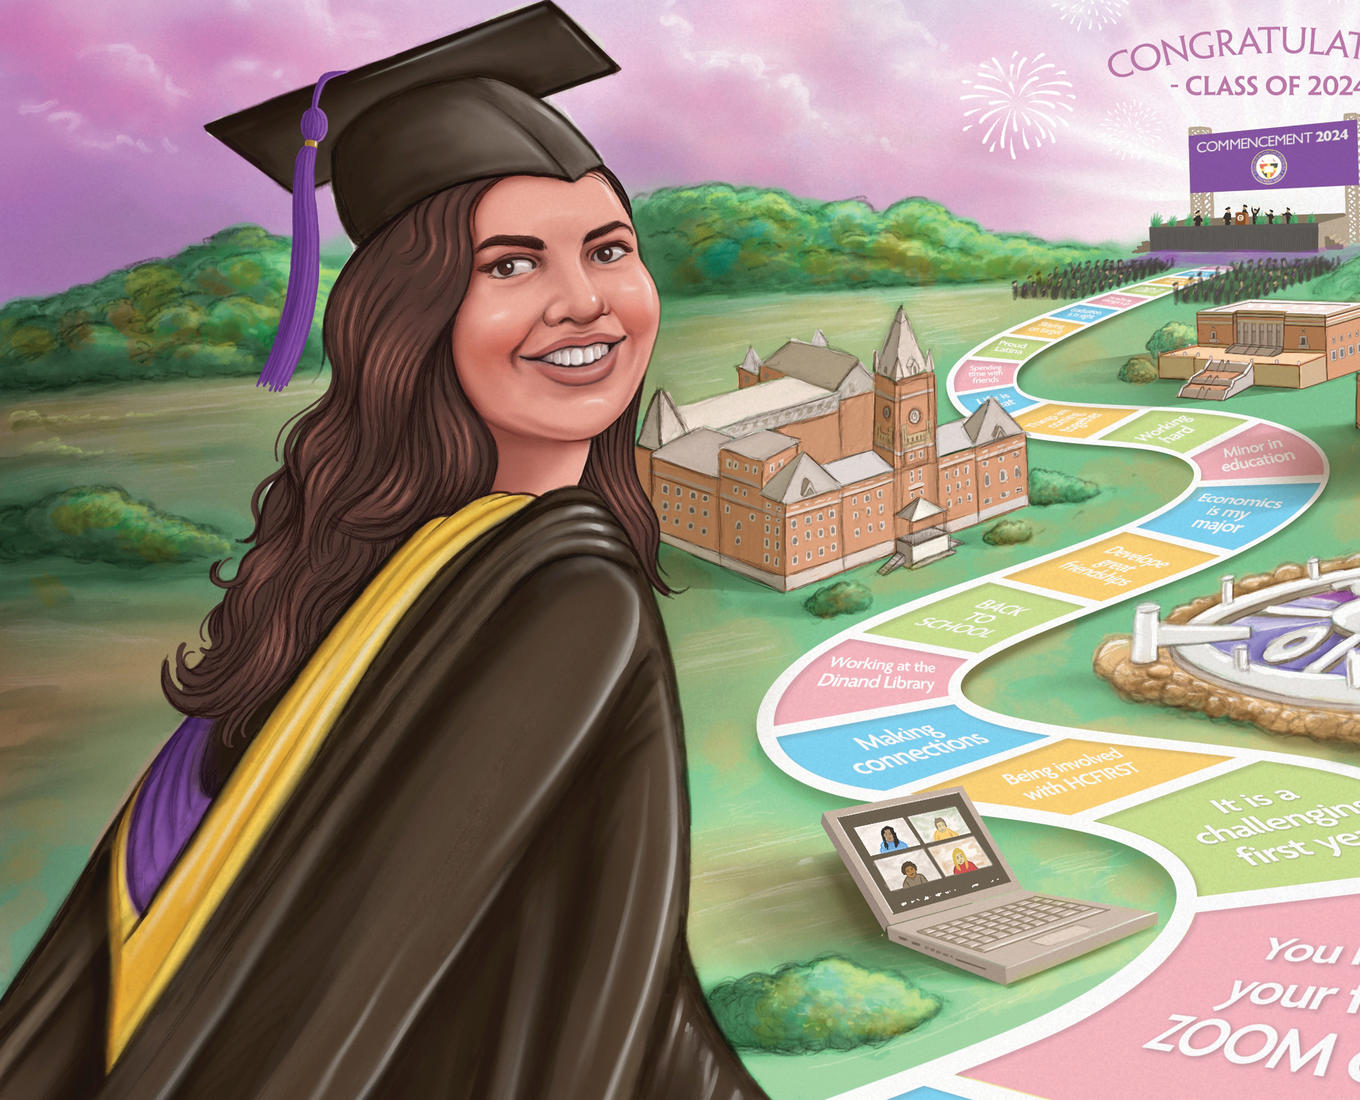 Illustraiton of a women wearing a cap and gown